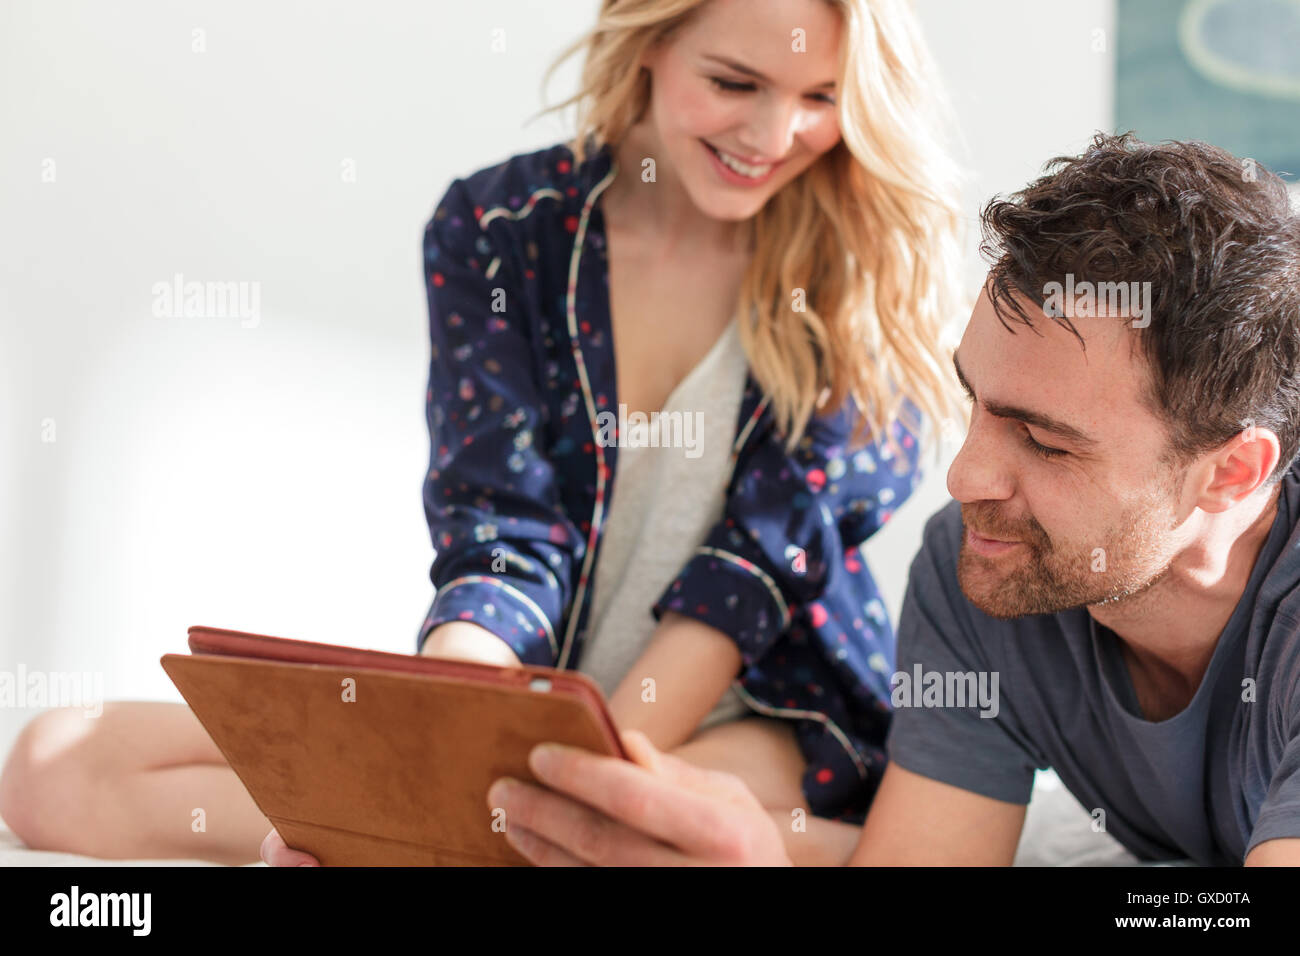 Couple looking at digital tablet smiling Stock Photo